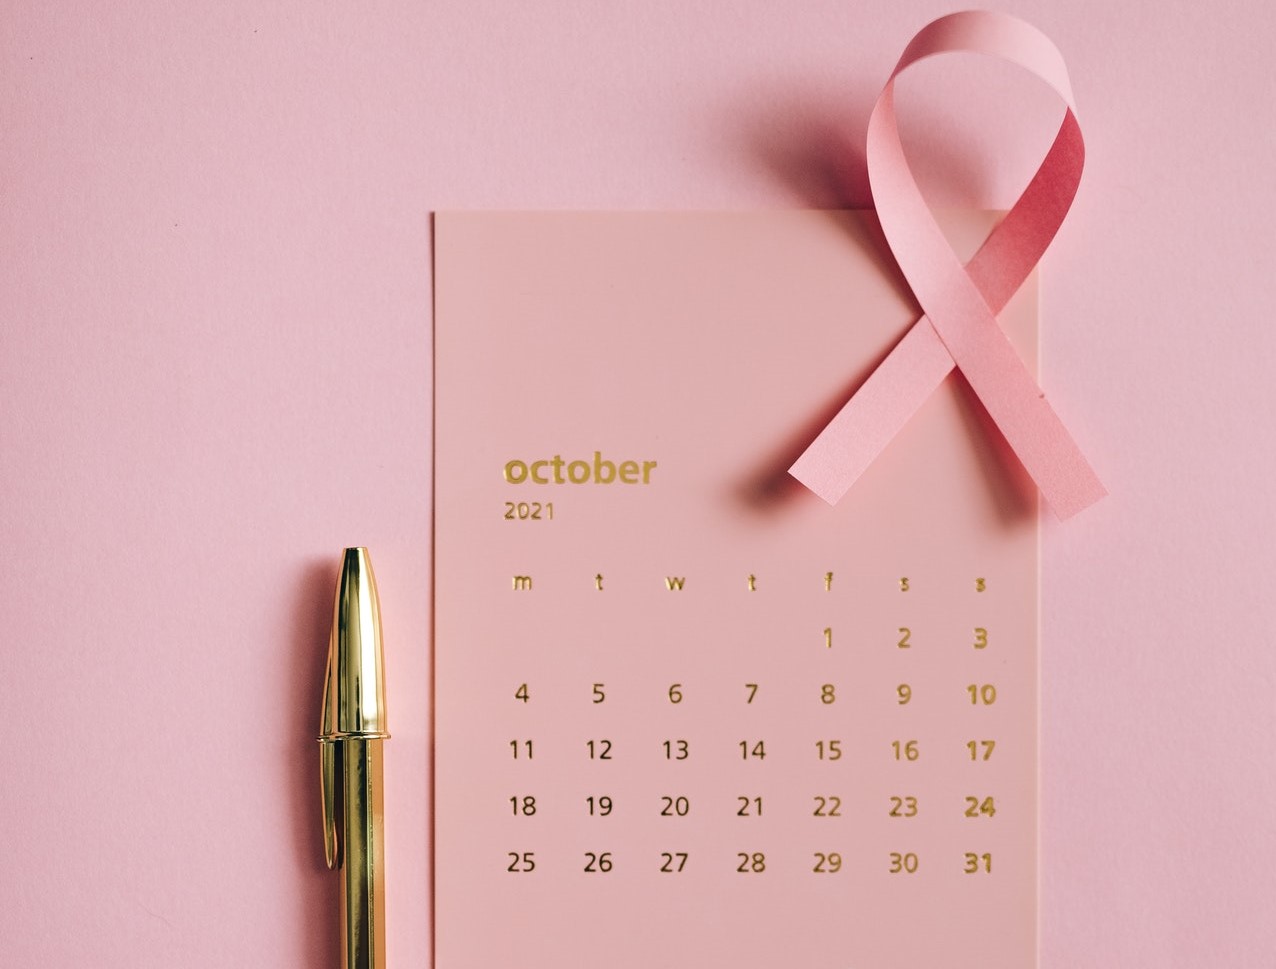 Celebrate Breast Cancer Awareness Month this October | Kids Car Donations